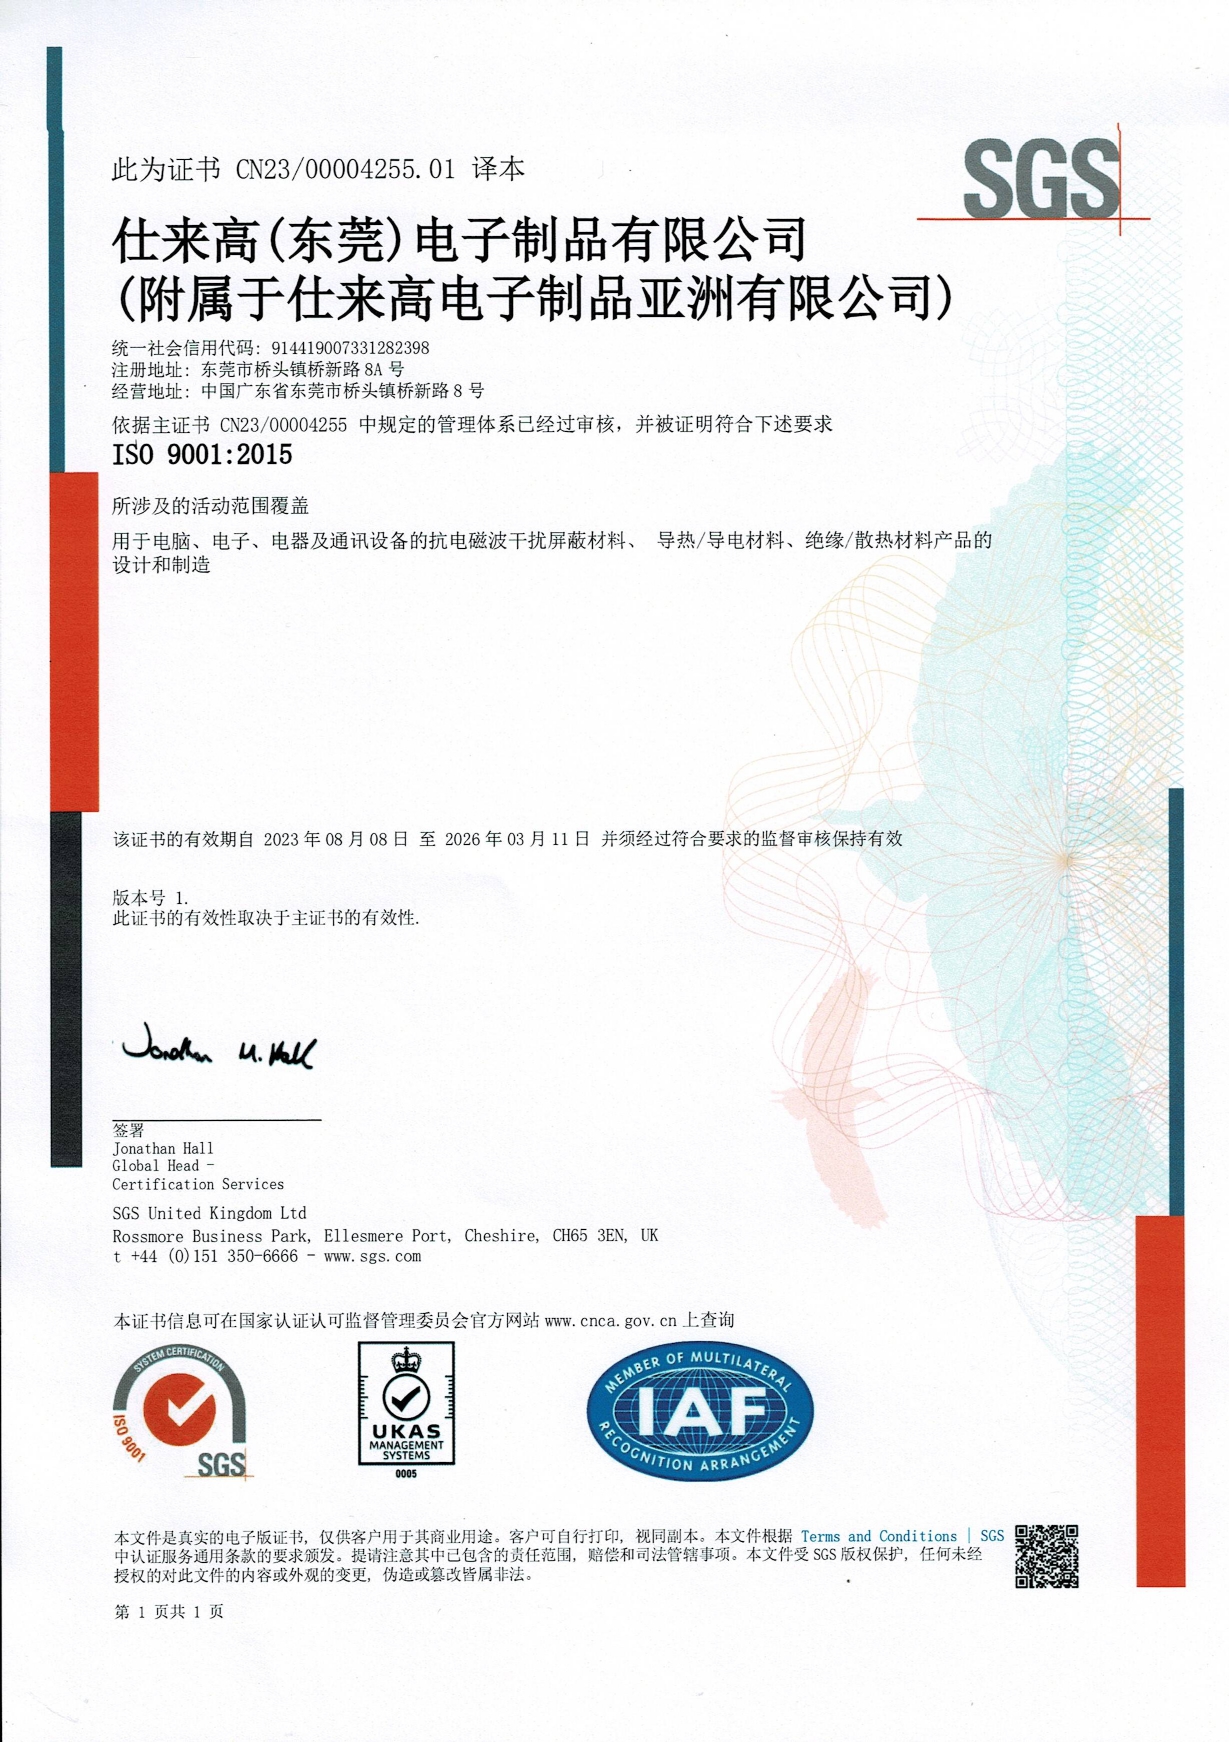 Schlegel Electronic Materials Asia Limited ISO 9001:2015